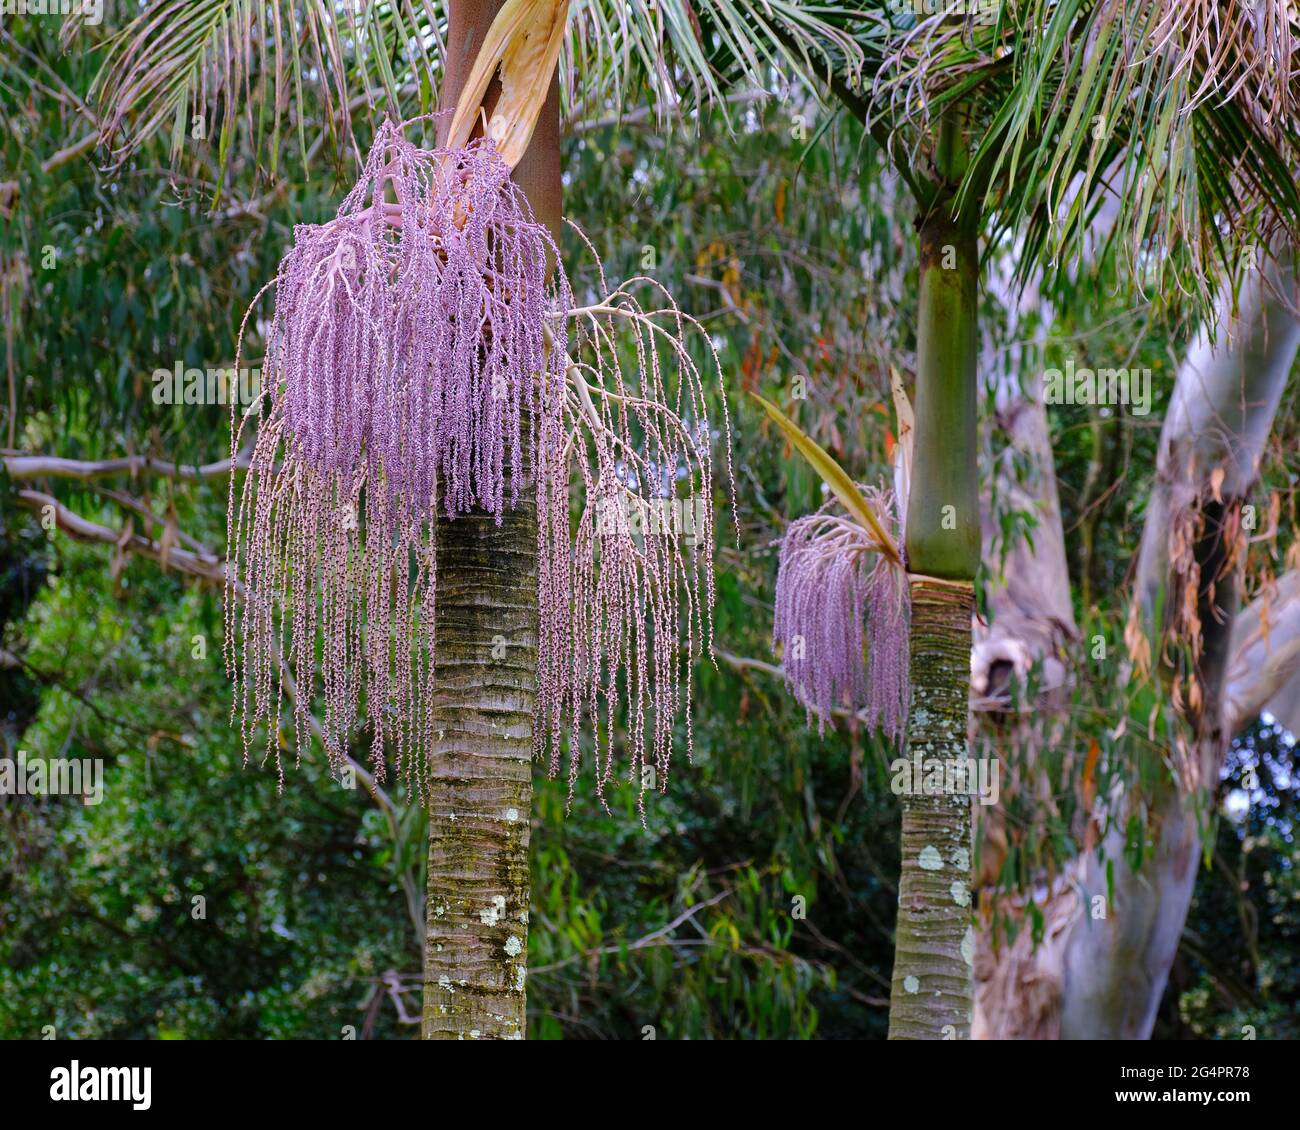 Bangalow Palm Seed Pods Banque D'Images